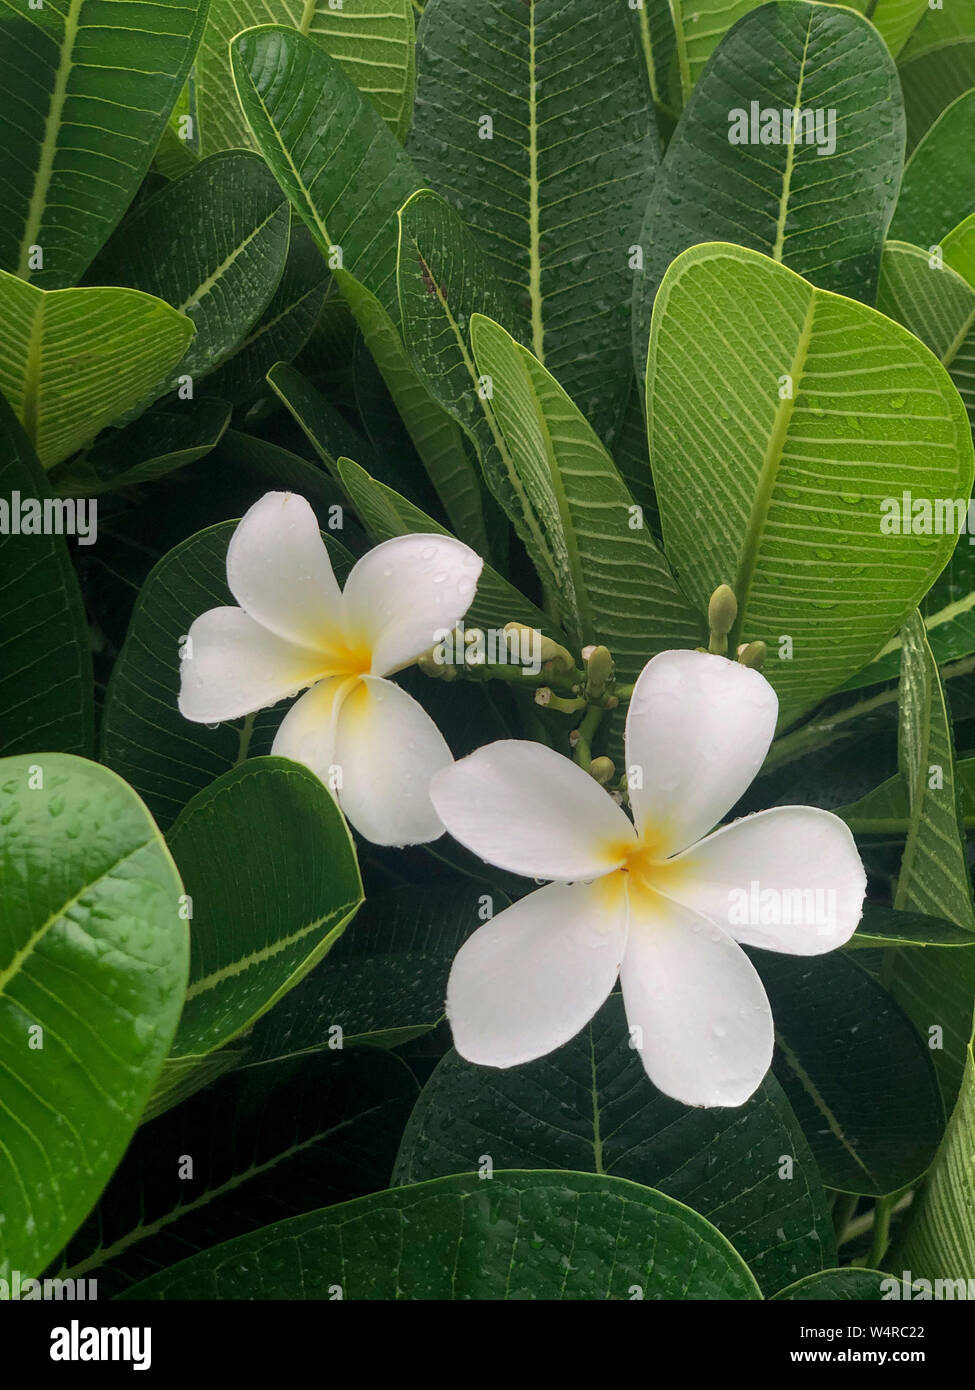 Frangipani flower also known as Temple flowers. Stock Photo